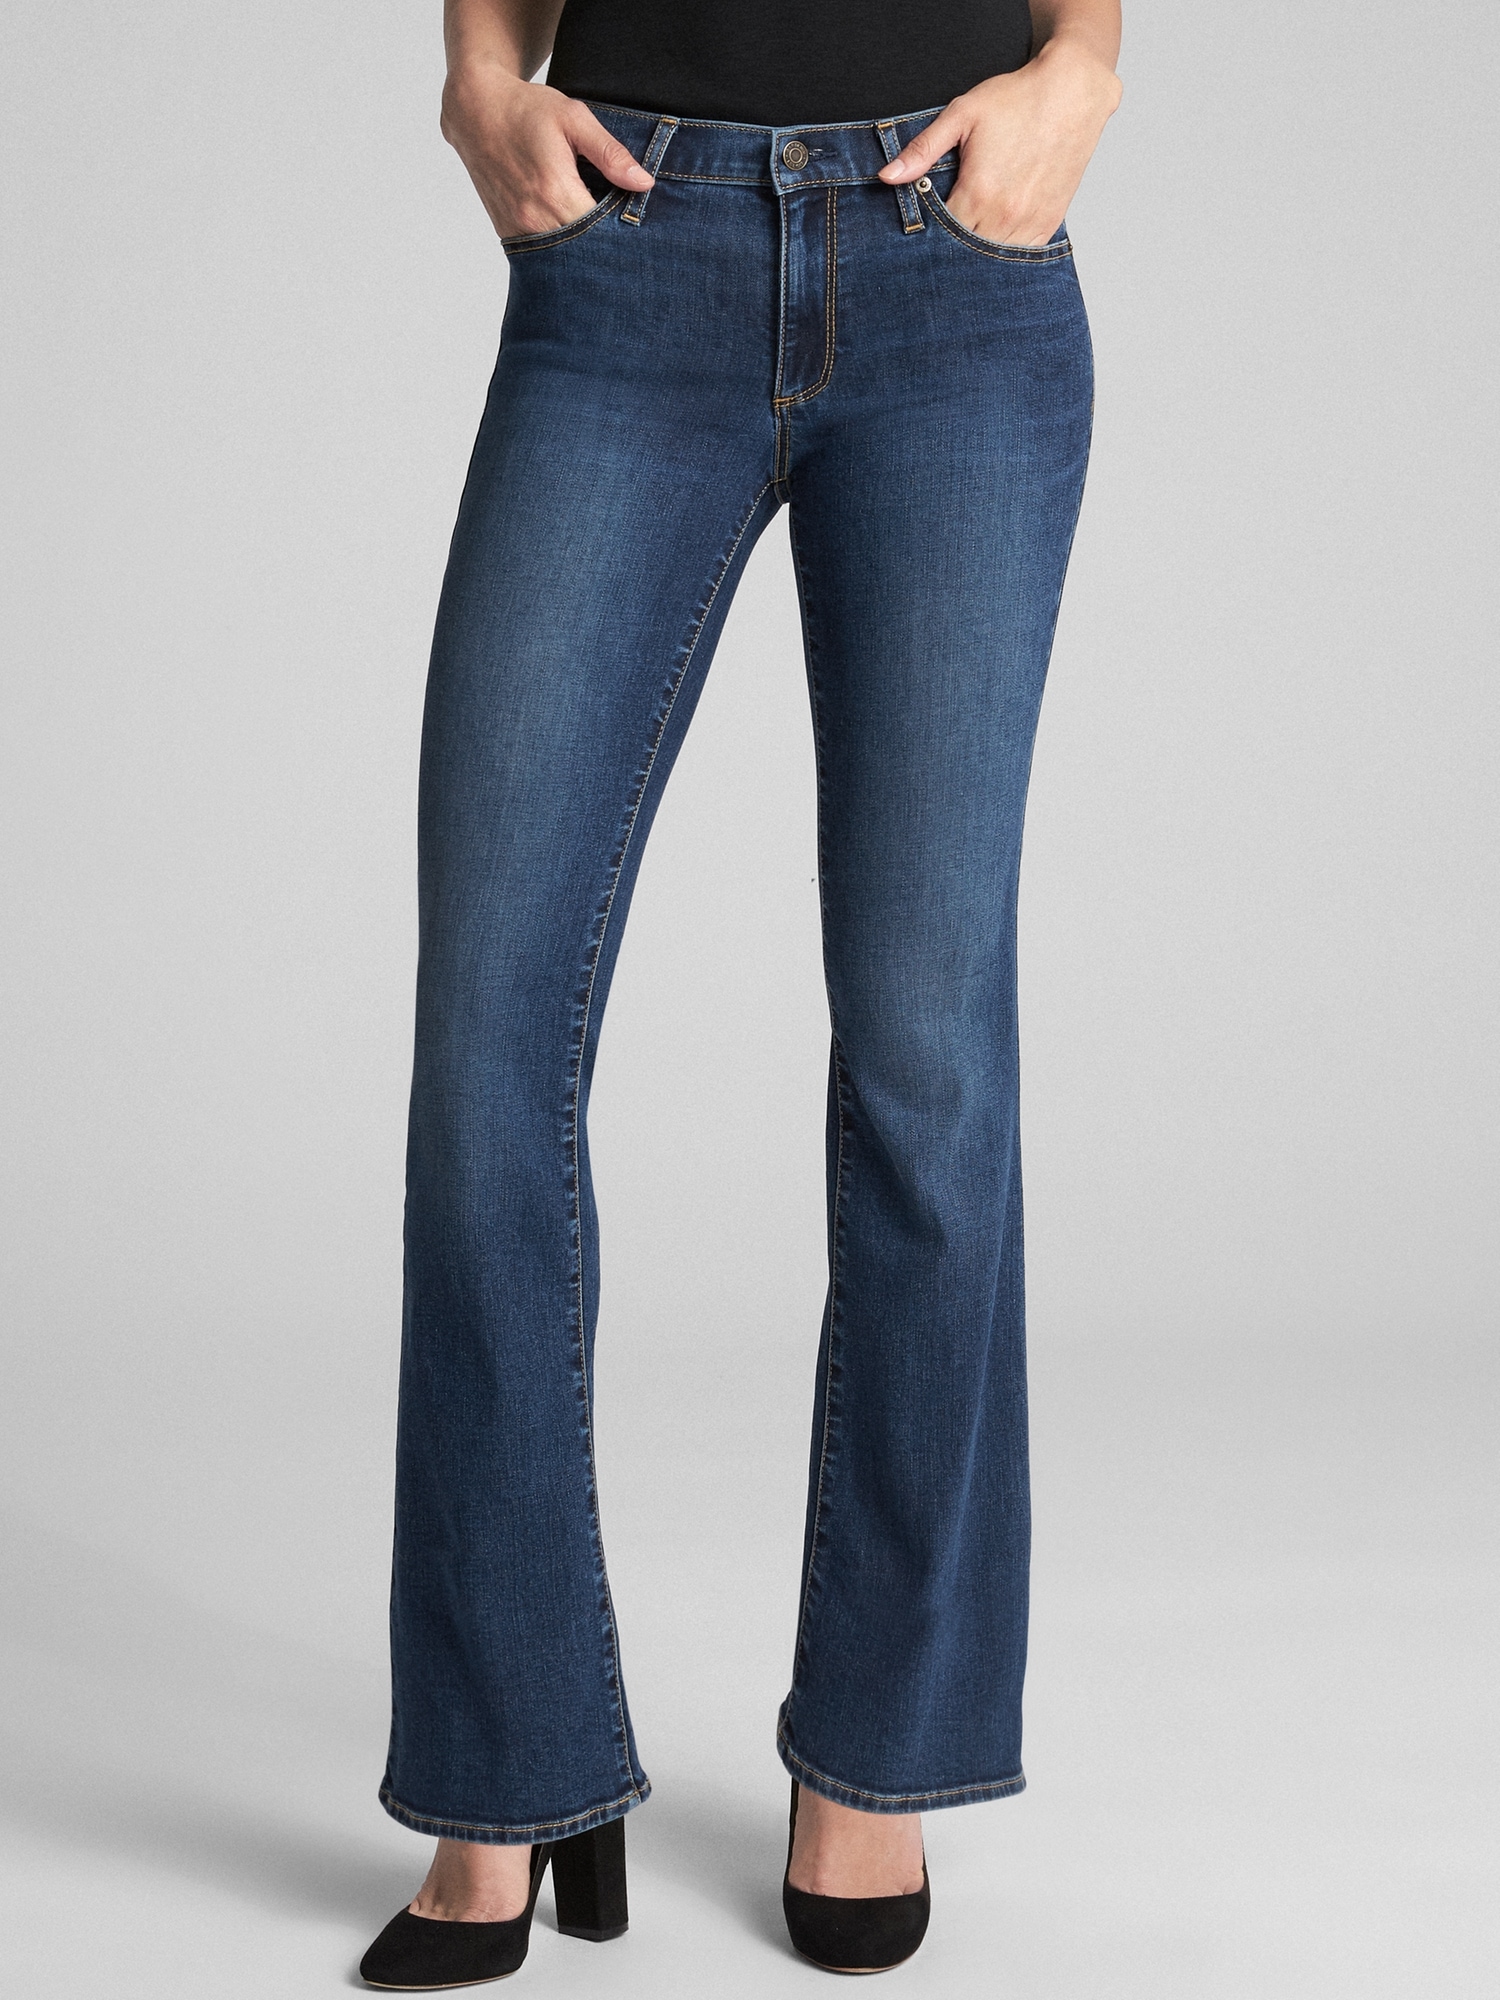 perfect bootcut jeans